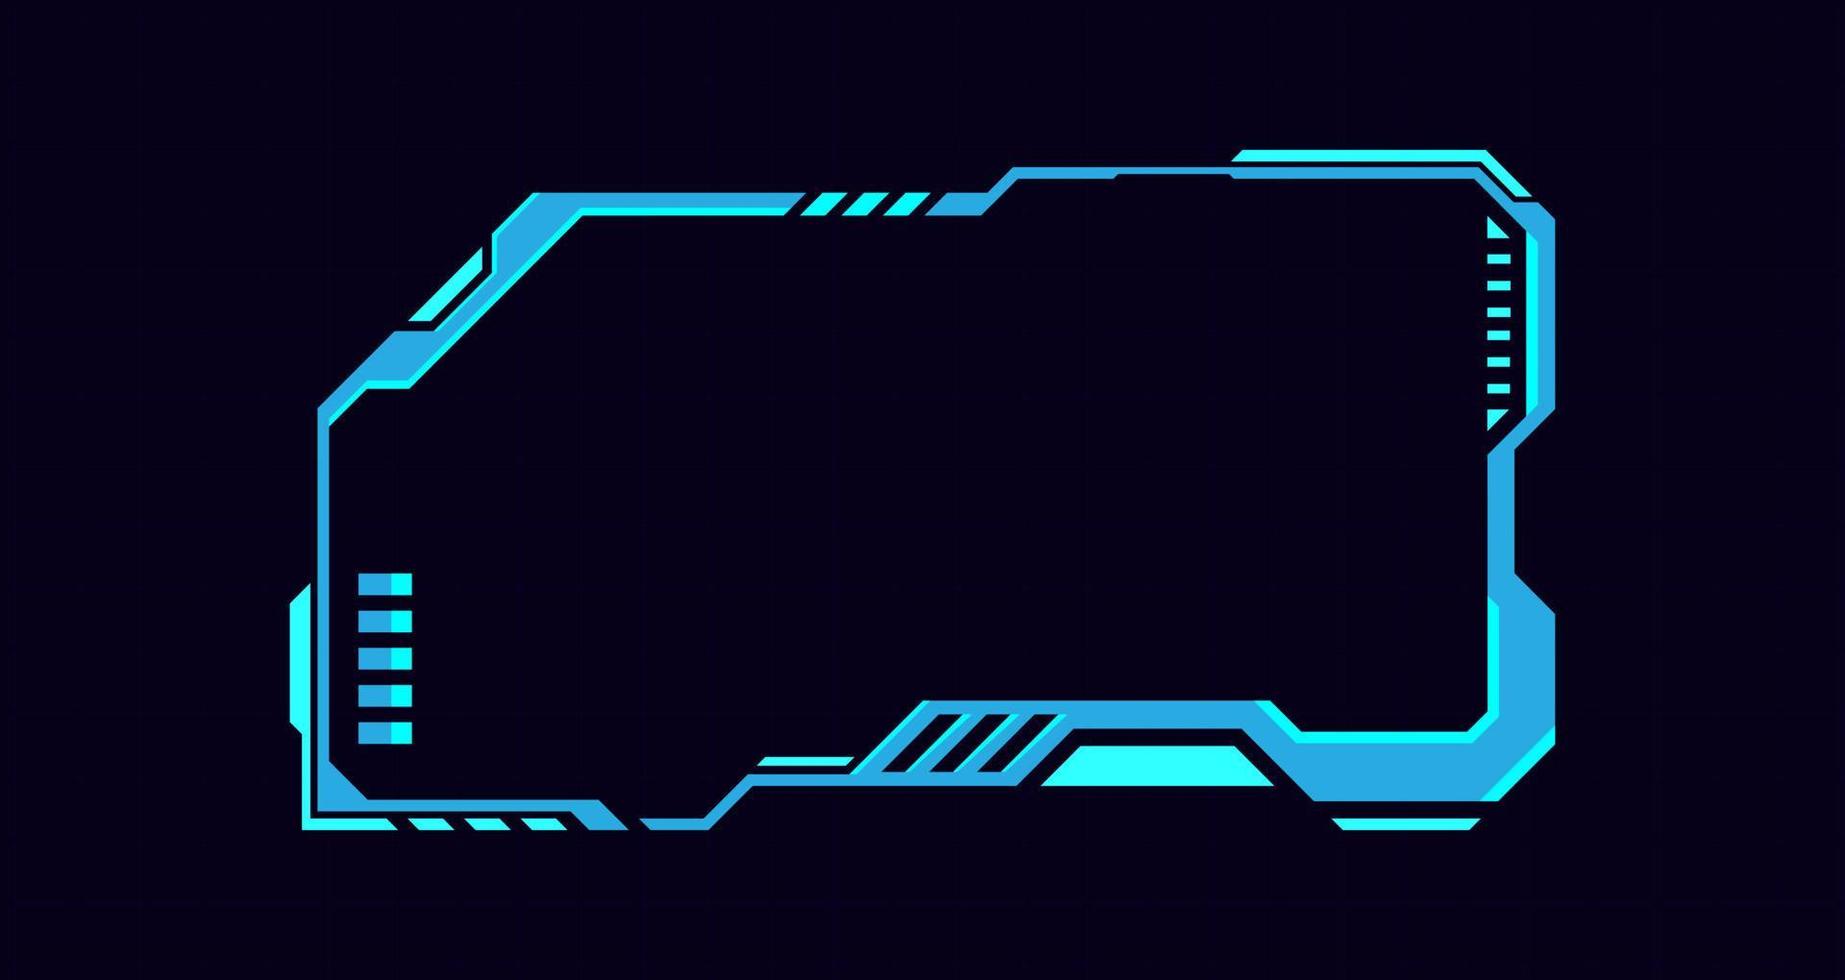 Frame hud abstract technology futuristic game control panel design. vector